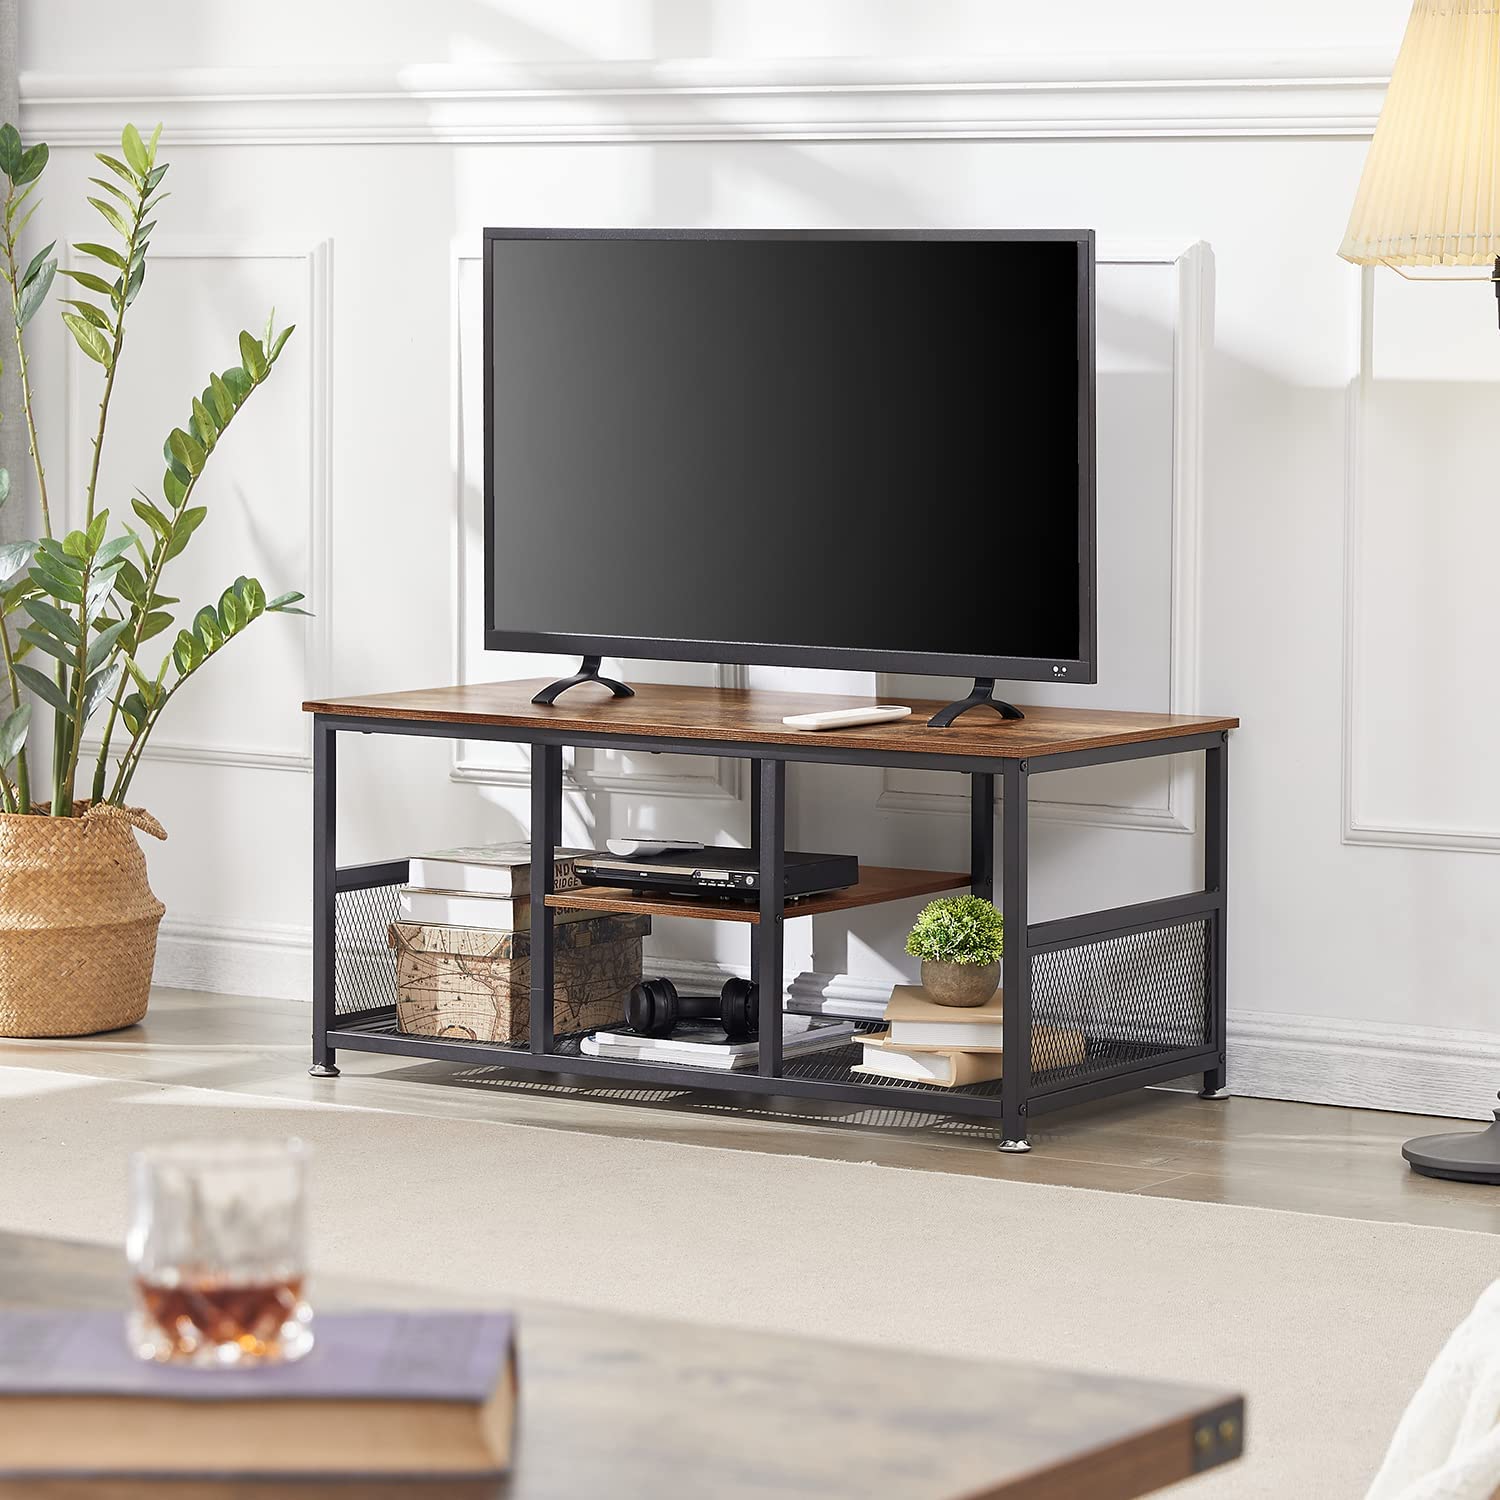 VECELO 39.4 Inch TV Stand/Coffee Table with Storage and Mesh Shelf for Living Room